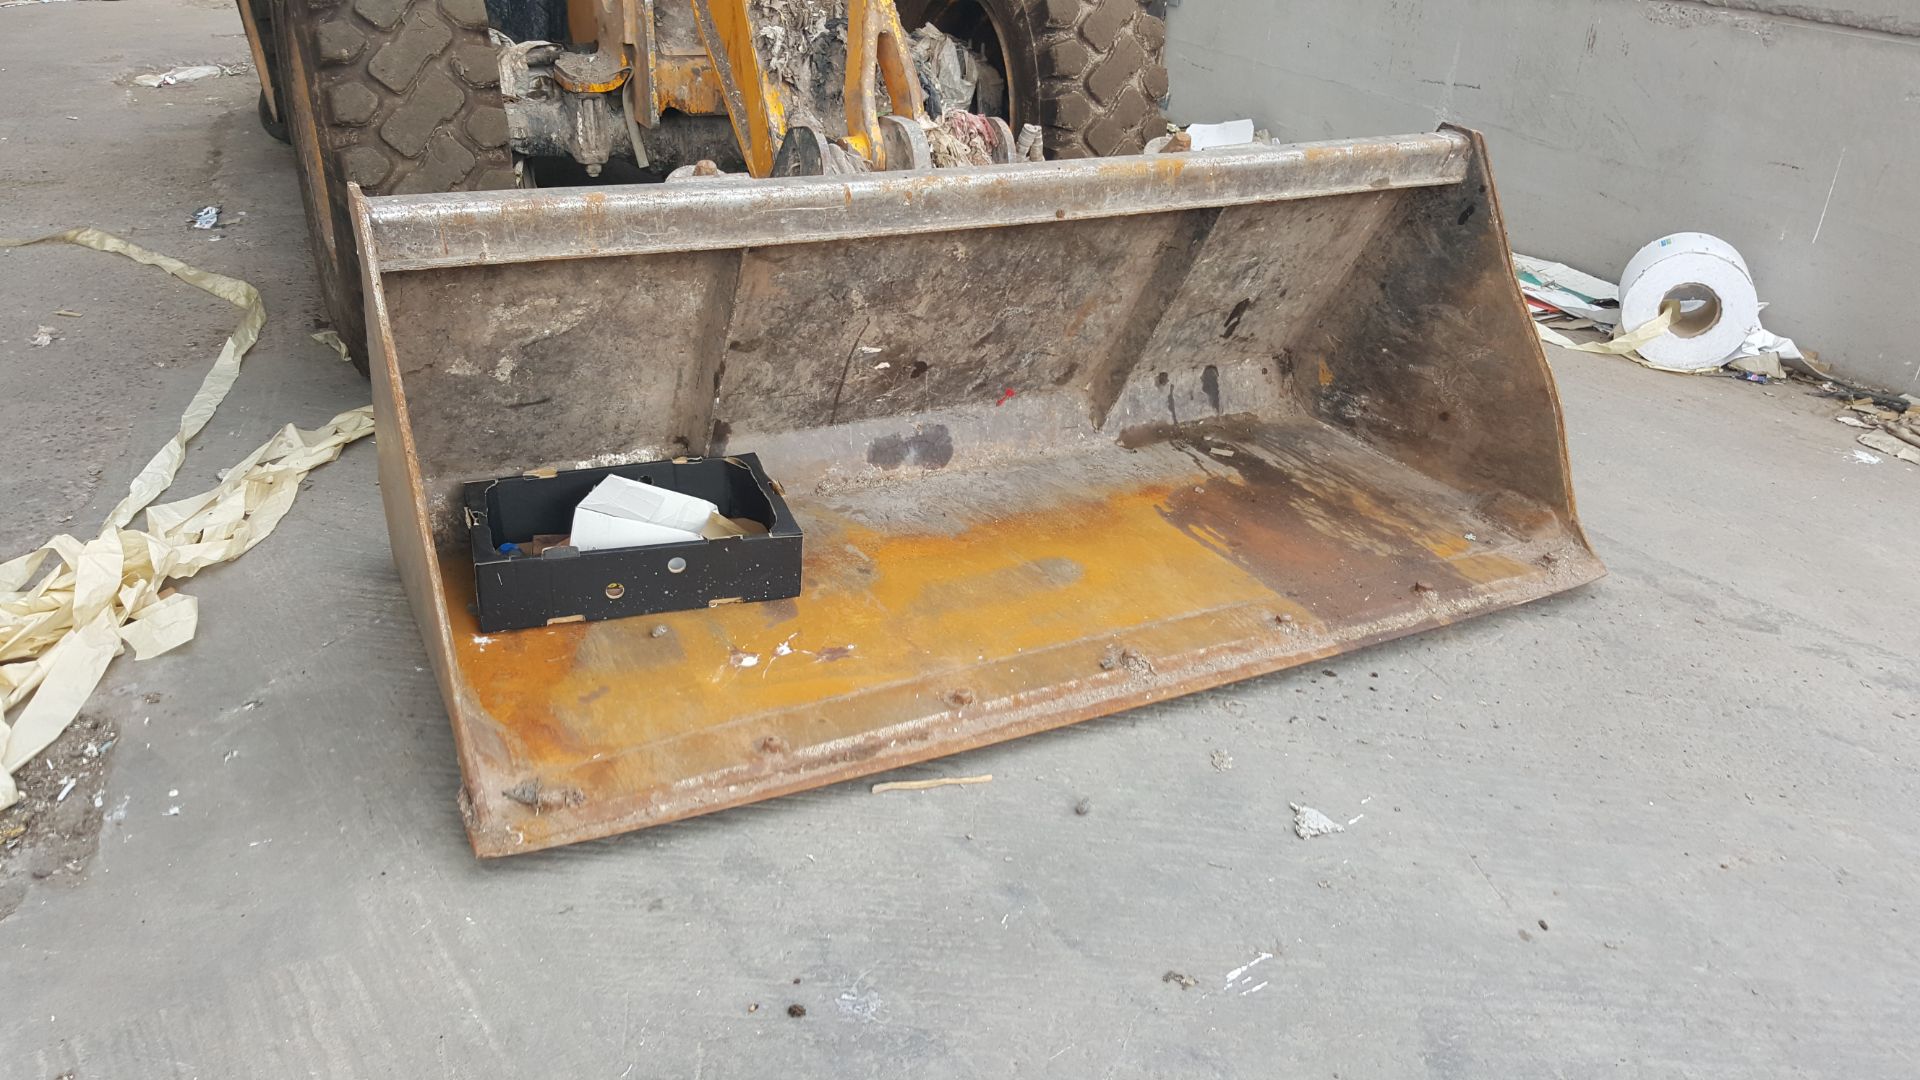 Slewtic approx. 7FT 6IN wide loading bucket